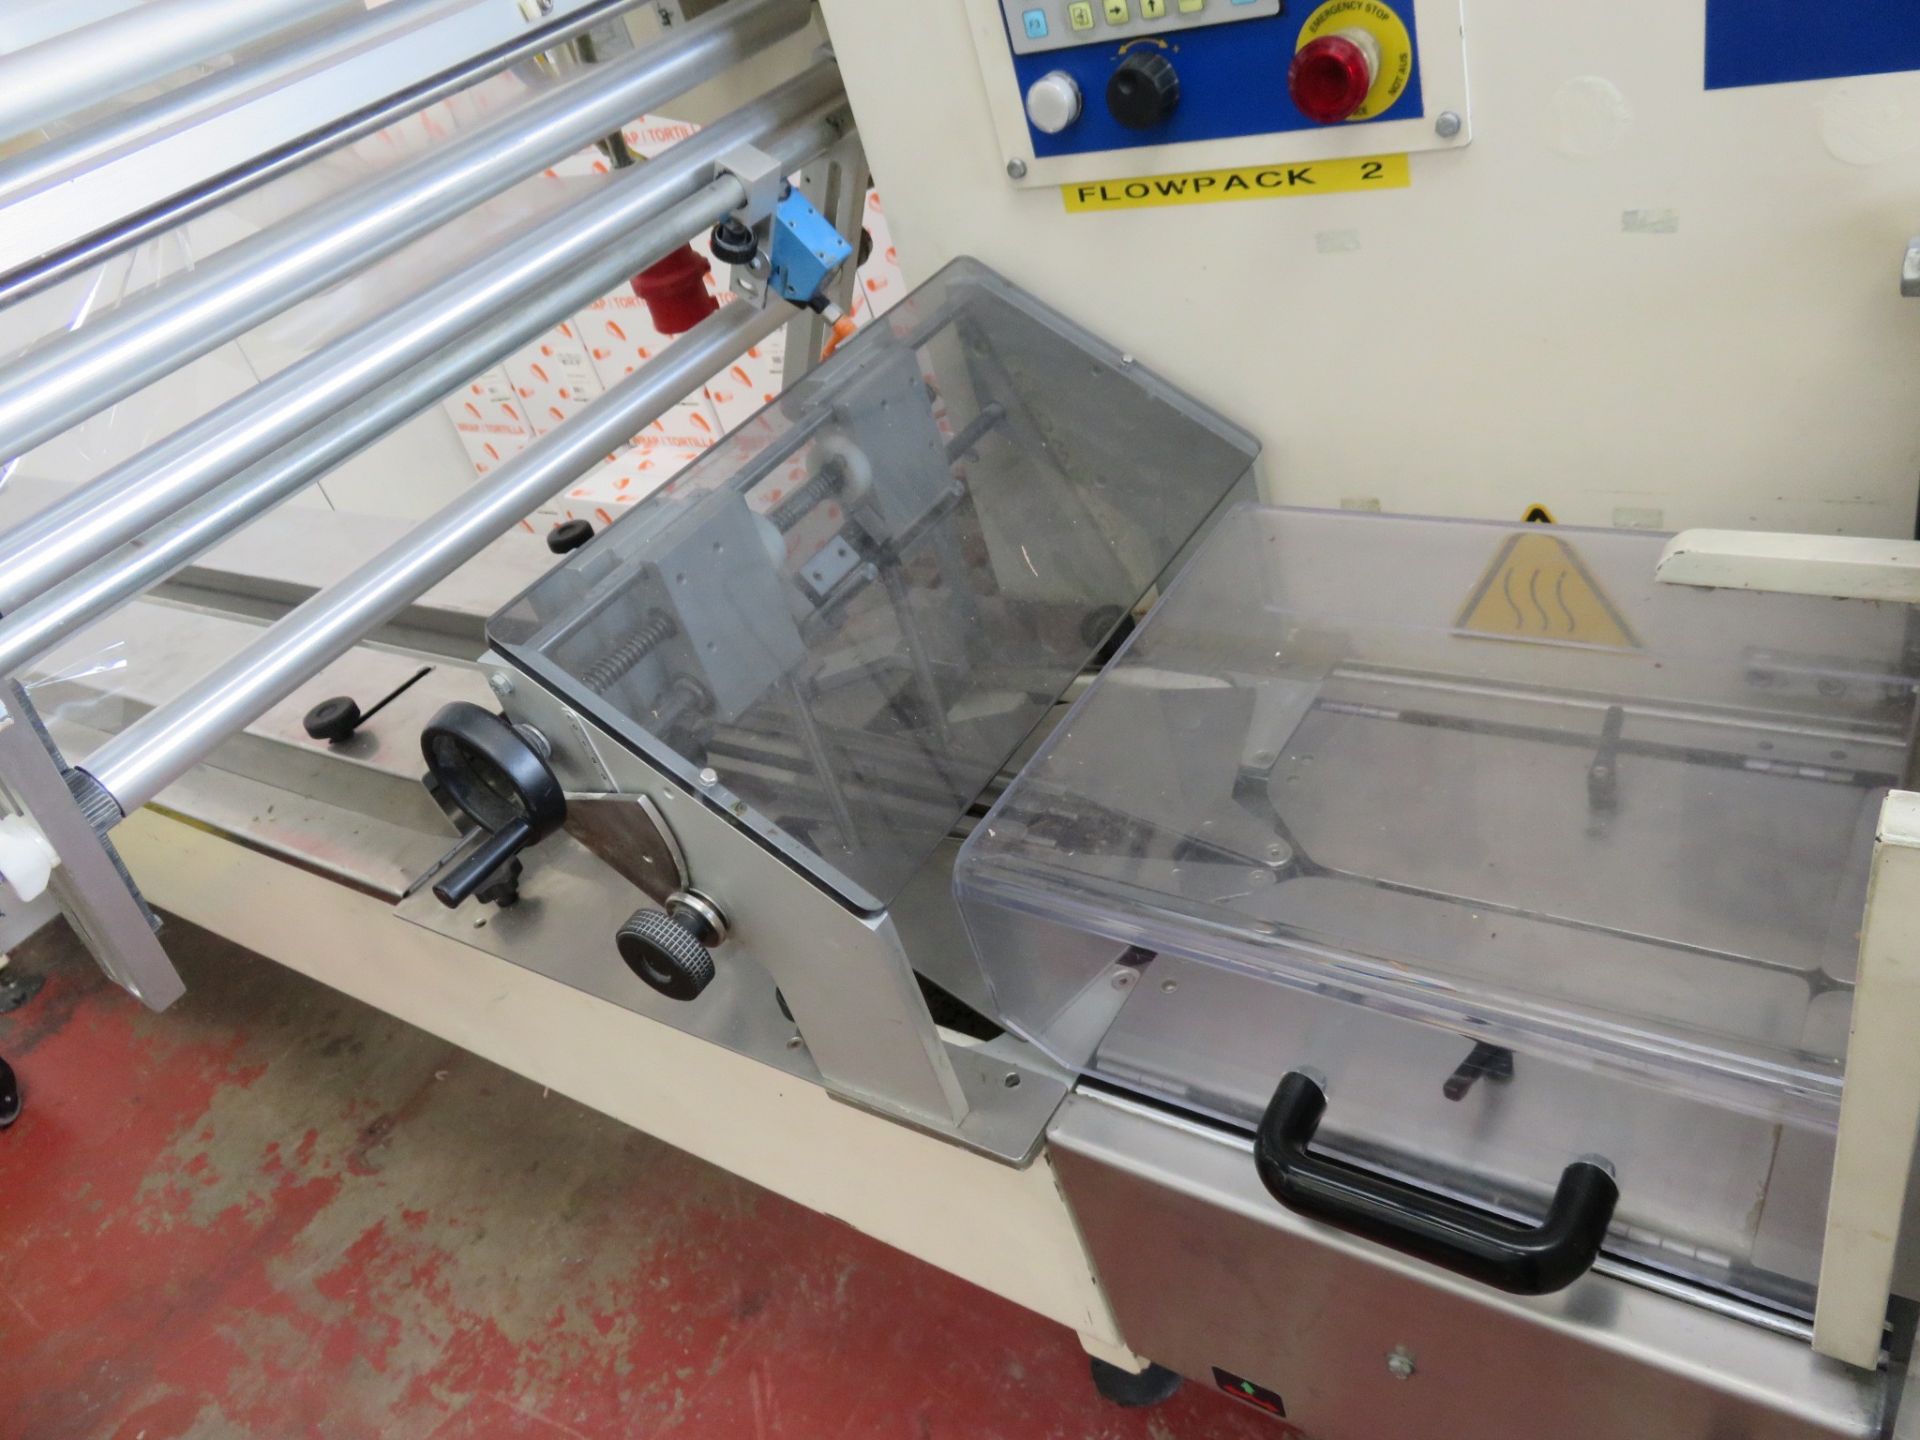 Ilapak Carrera 500 PC Flow-wrapper with adjustable box. PEC for pre-printed film Smartdate 3. LO £50 - Image 10 of 10